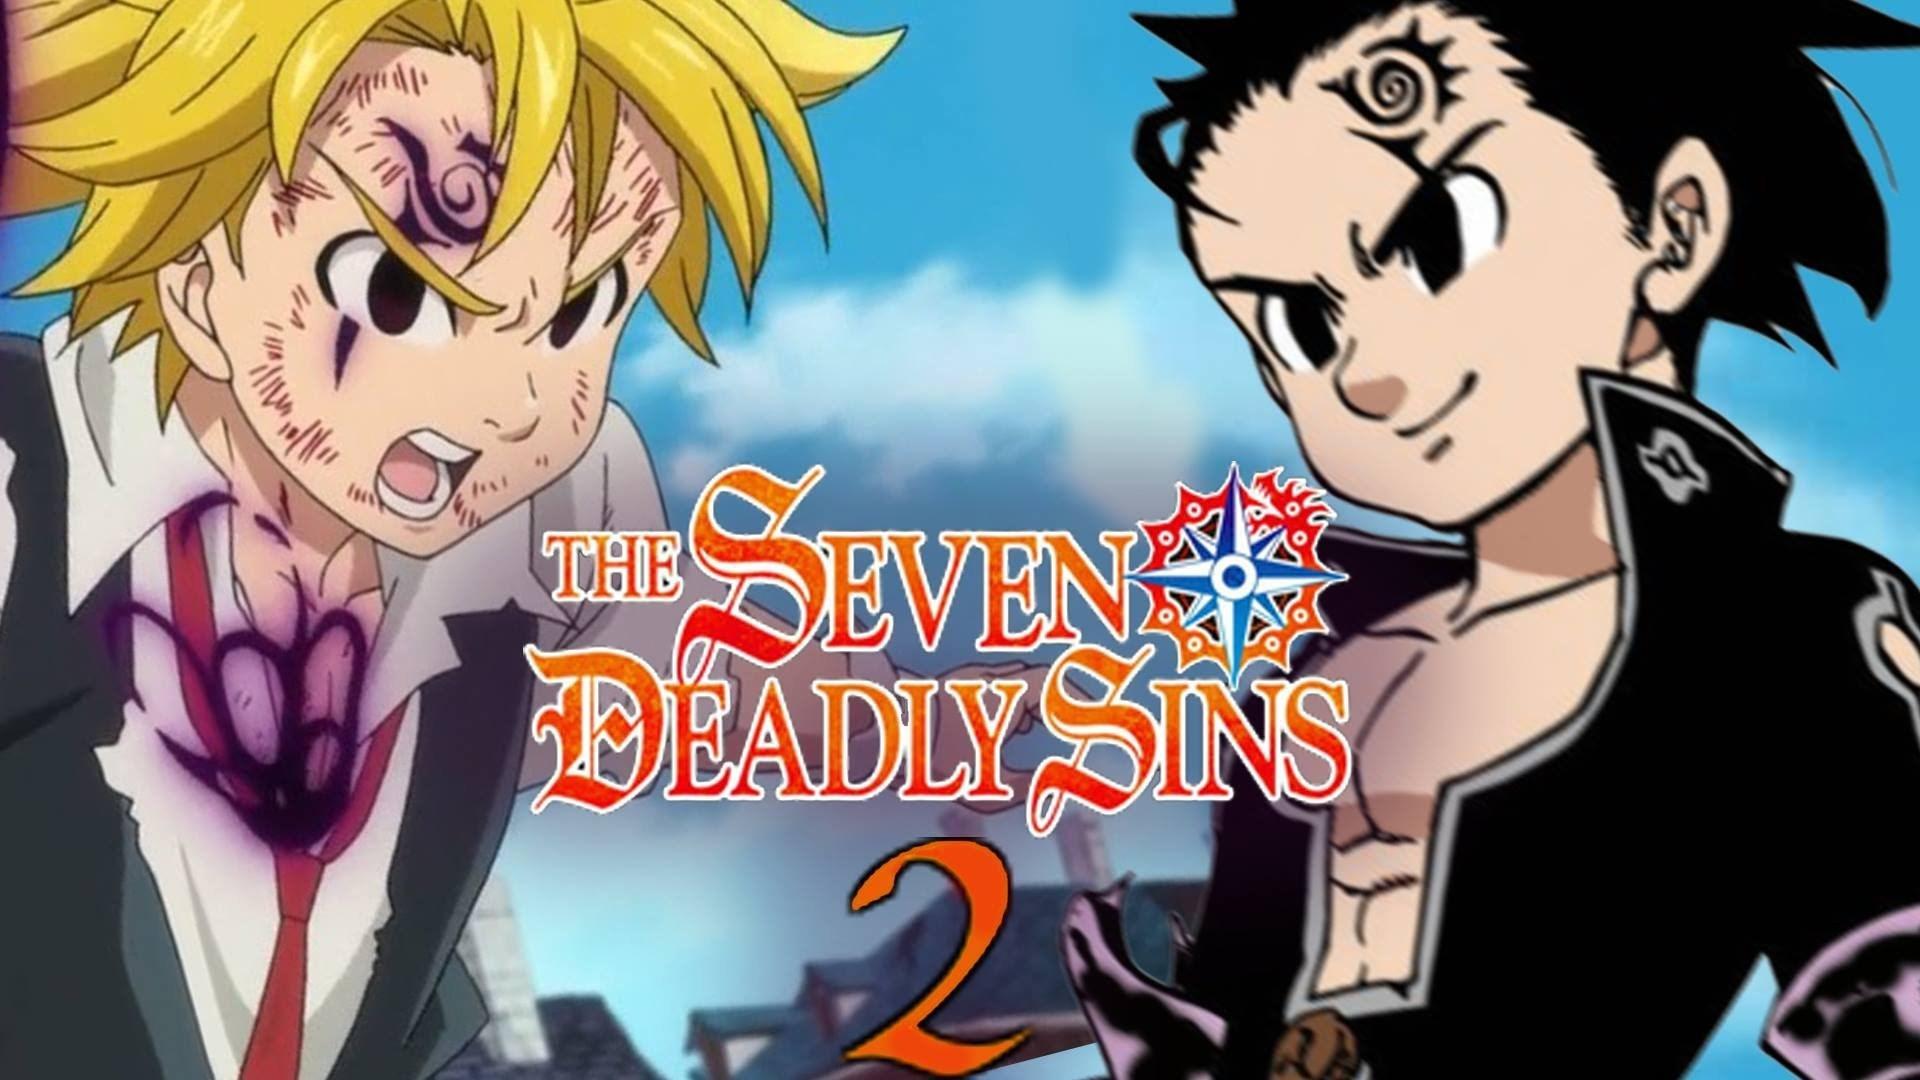 The Seven Deadly Sins Season Opening Ending OST Download